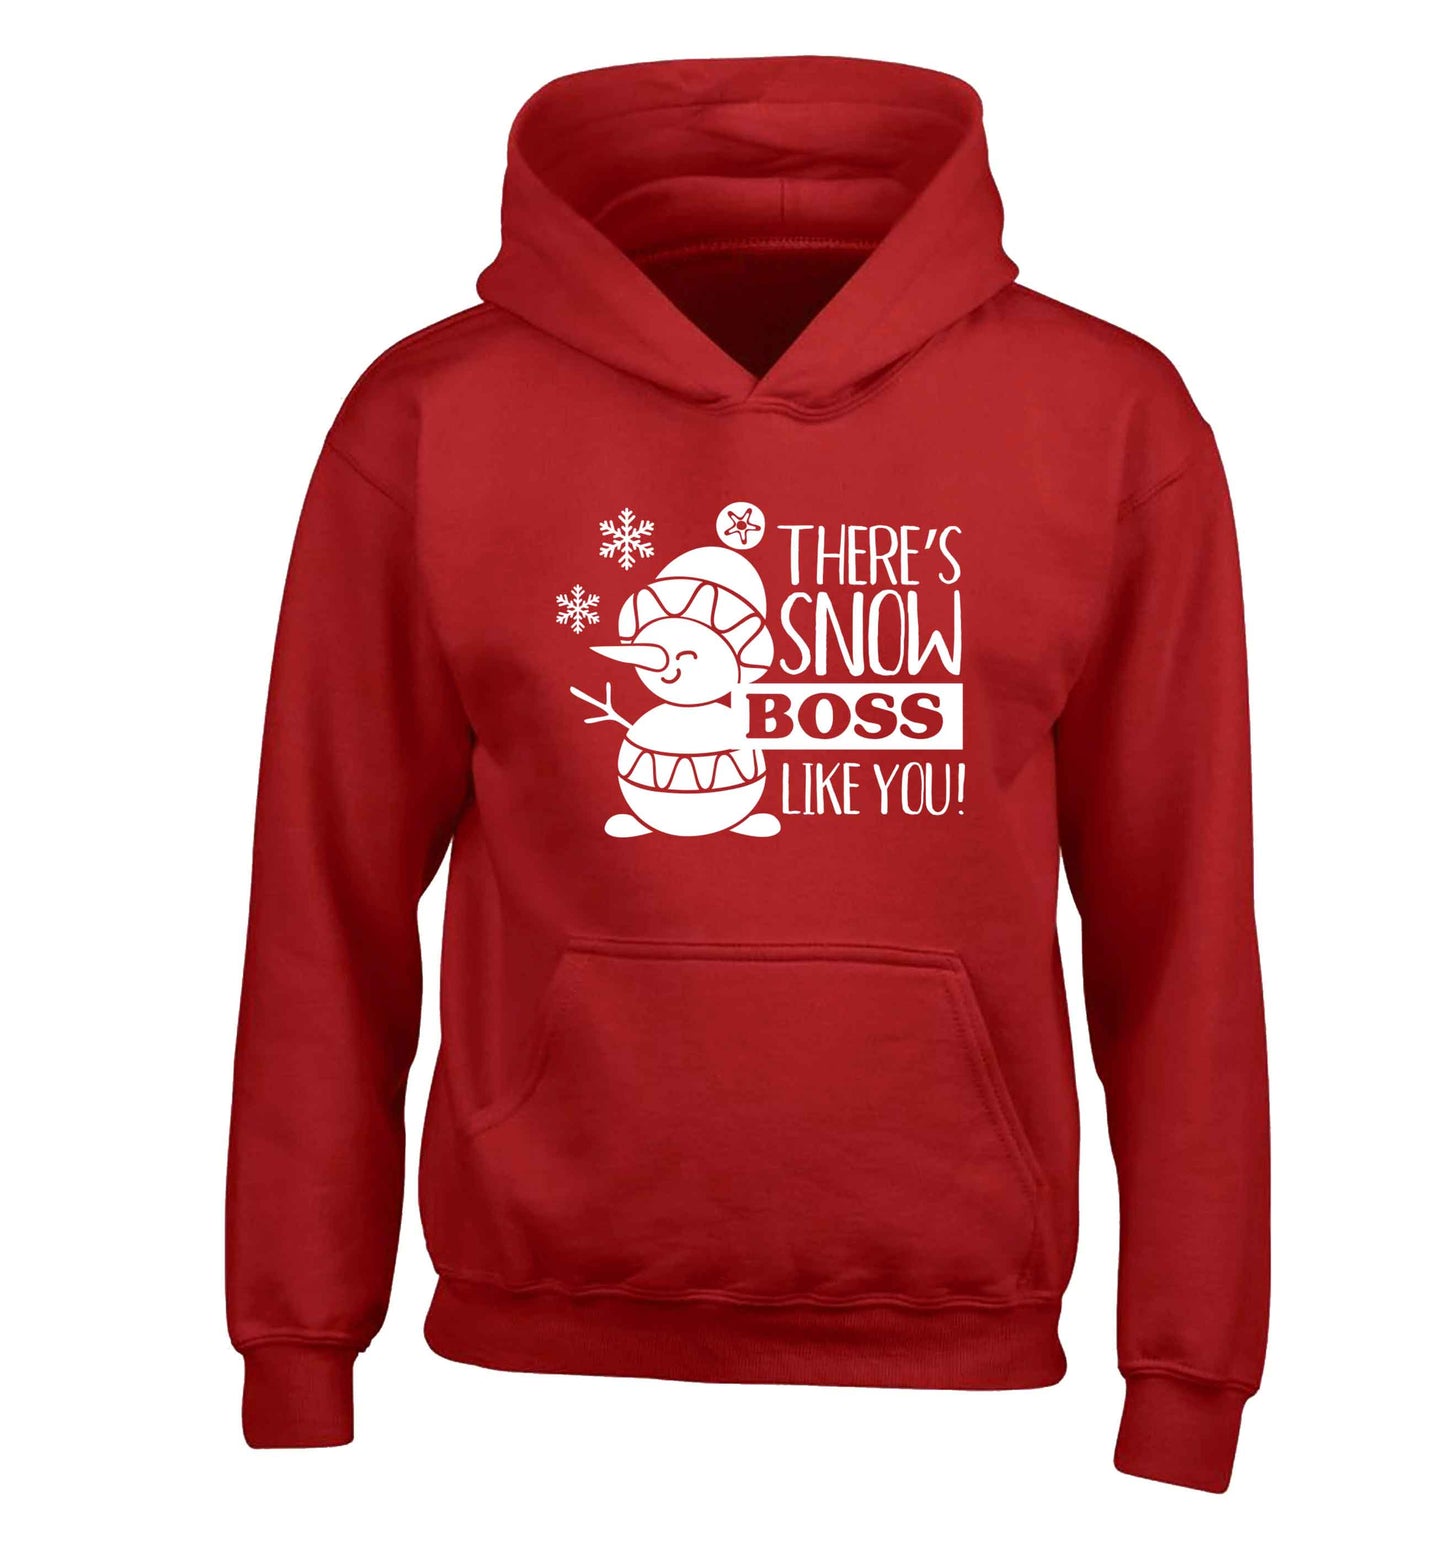 There's snow boss like you children's red hoodie 12-13 Years